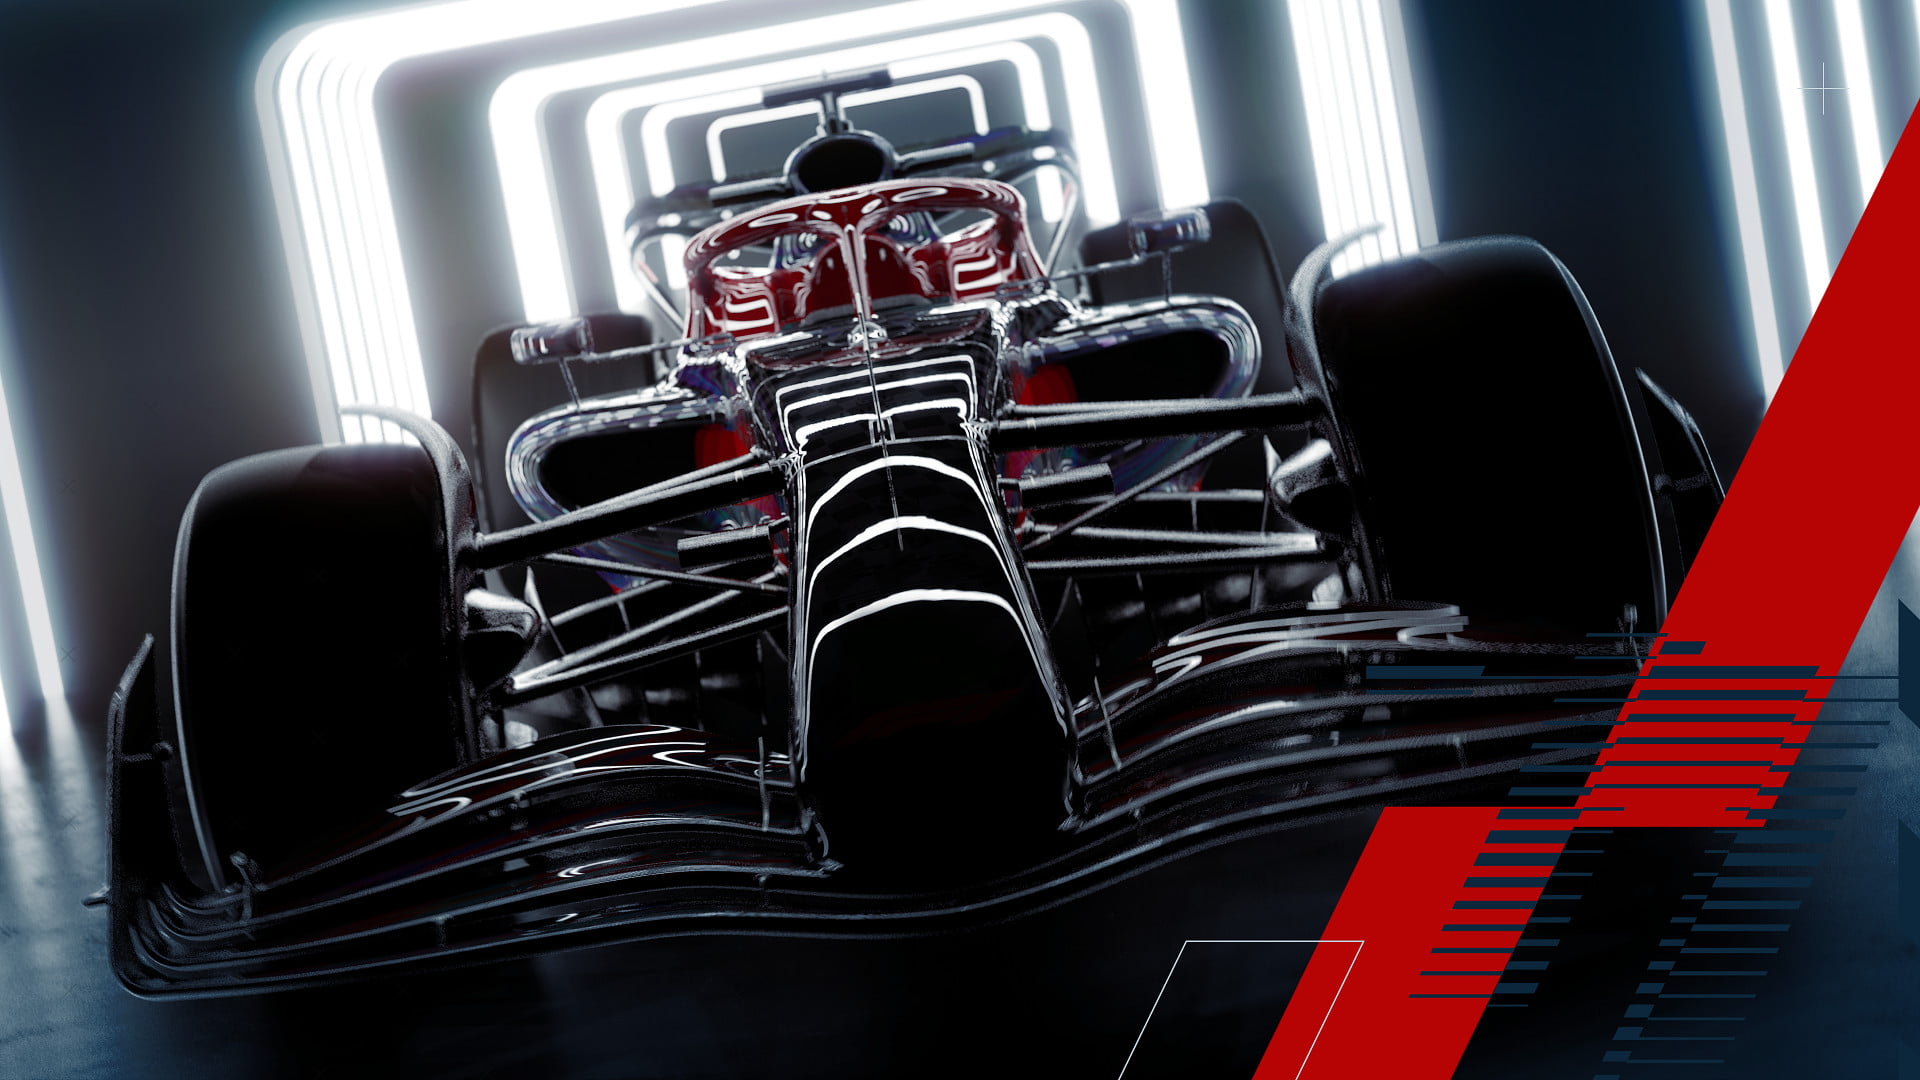 F1 2022 races to the PC with VR support